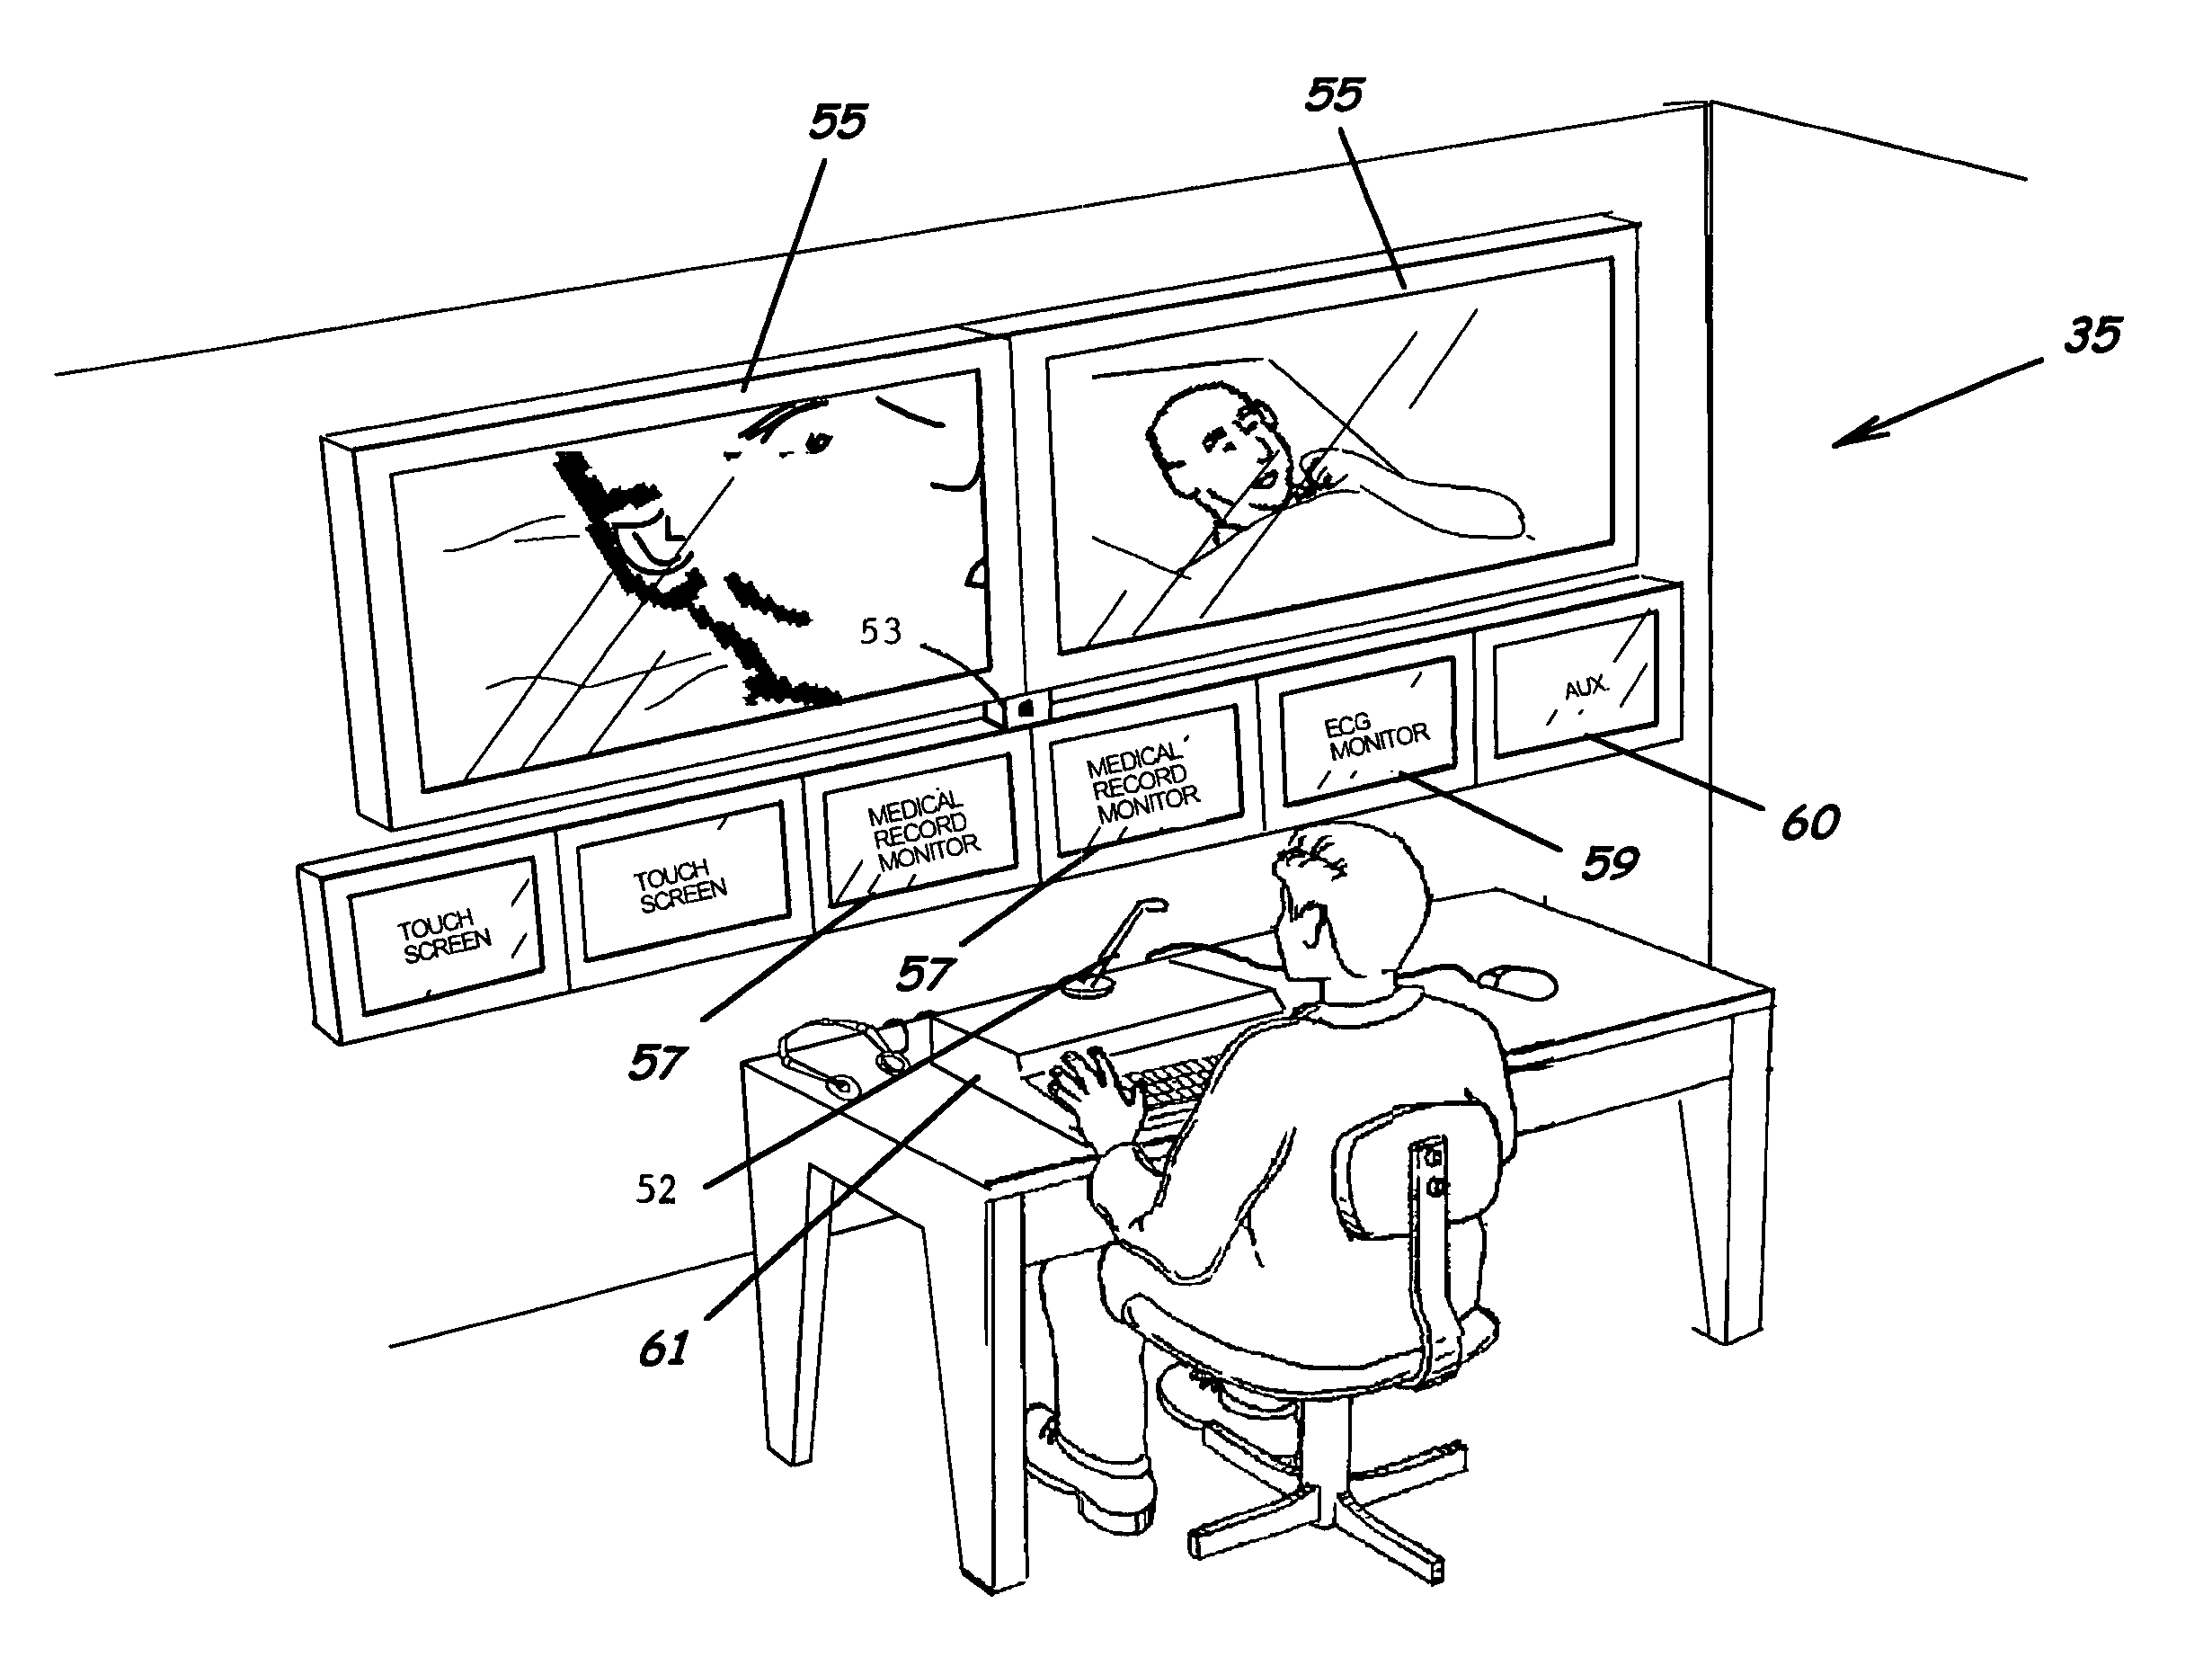 System, method and program product for delivering medical services from a remote location